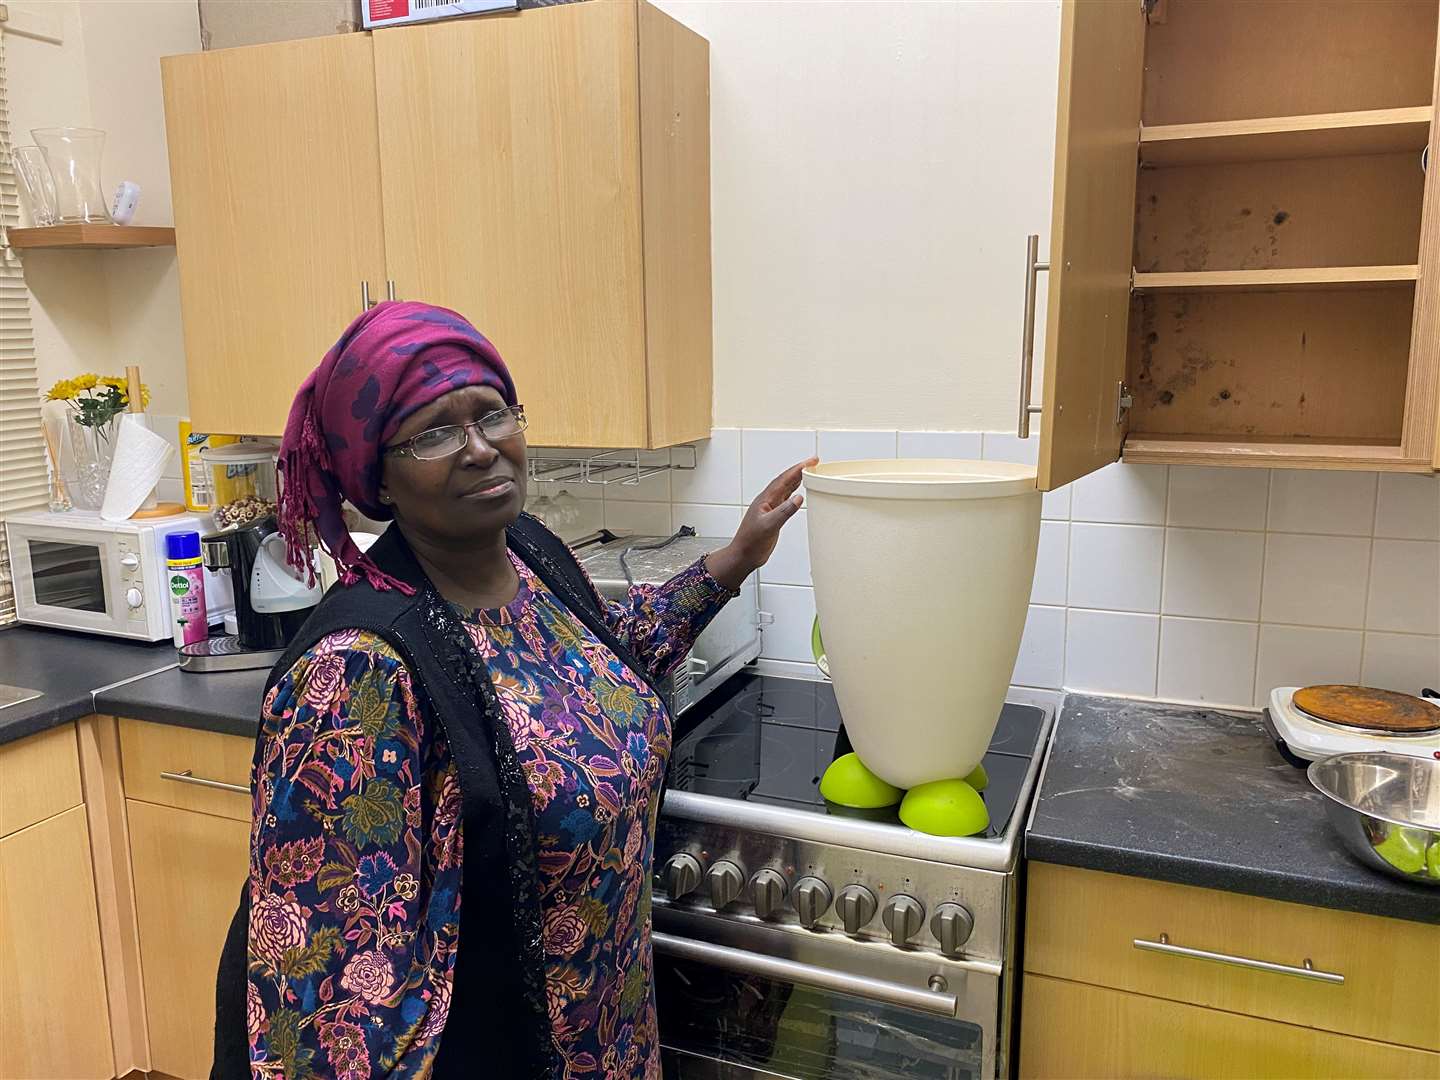 Tandy Dube was able to see her relatives at Christmas after dealing with a leak in her kitchen for more than six weeks